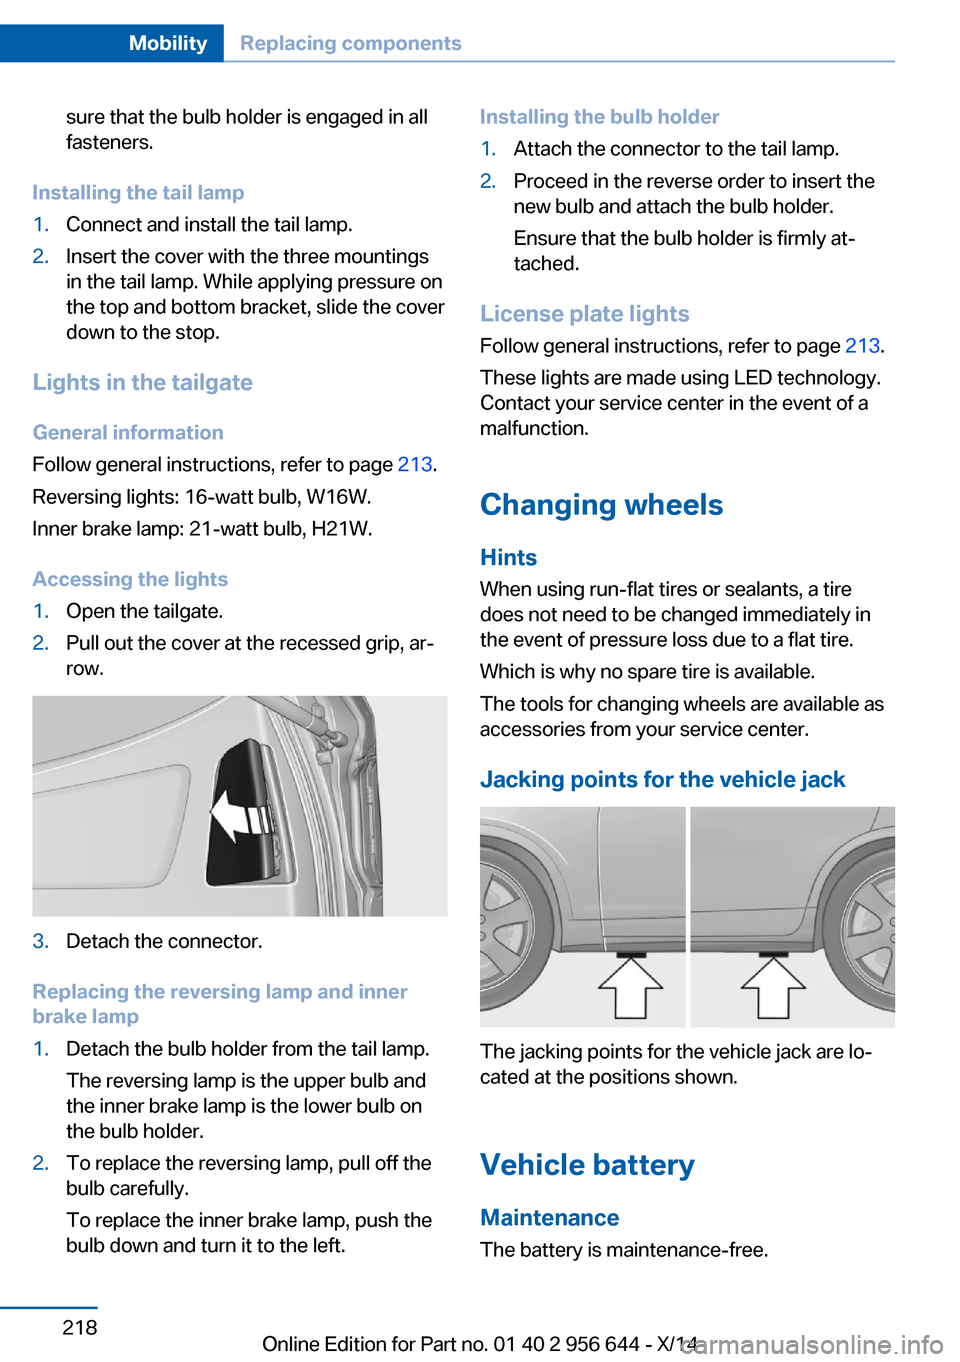 BMW X3 2014 F25 Owners Manual sure that the bulb holder is engaged in all
fasteners.
Installing the tail lamp
1.Connect and install the tail lamp.2.Insert the cover with the three mountings
in the tail lamp. While applying pressur